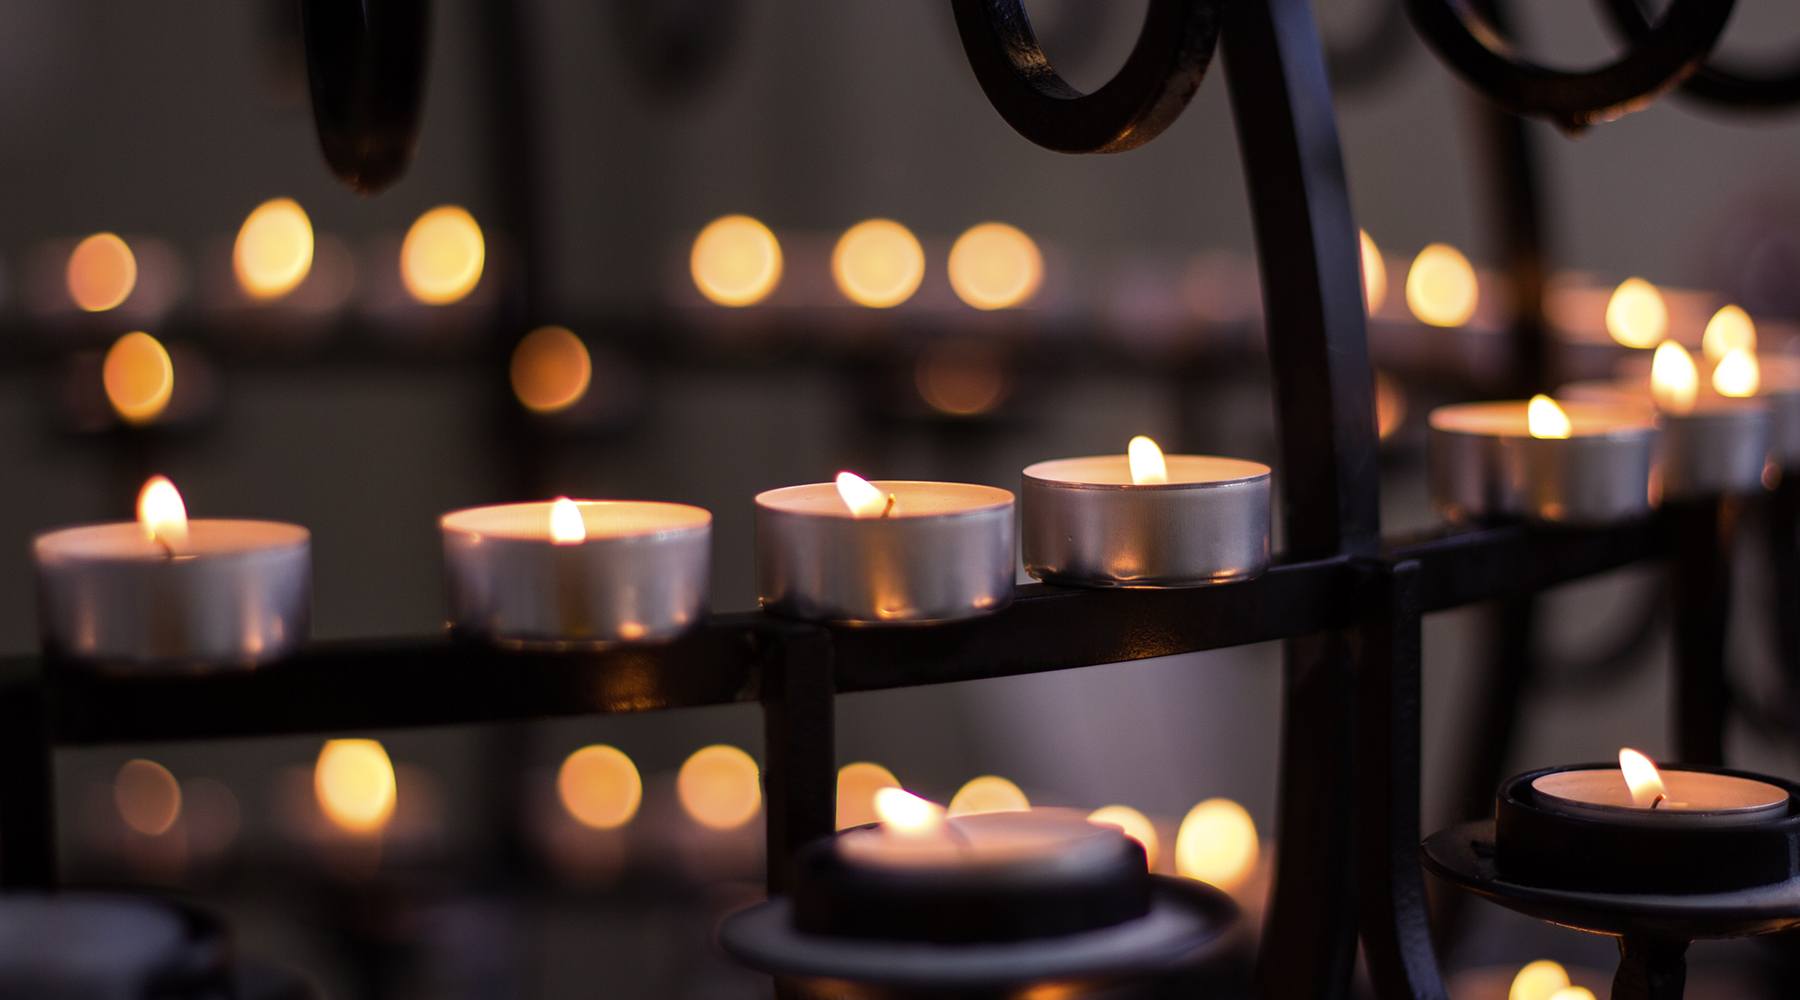 Lit candles in a church in memory of loved ones who have died